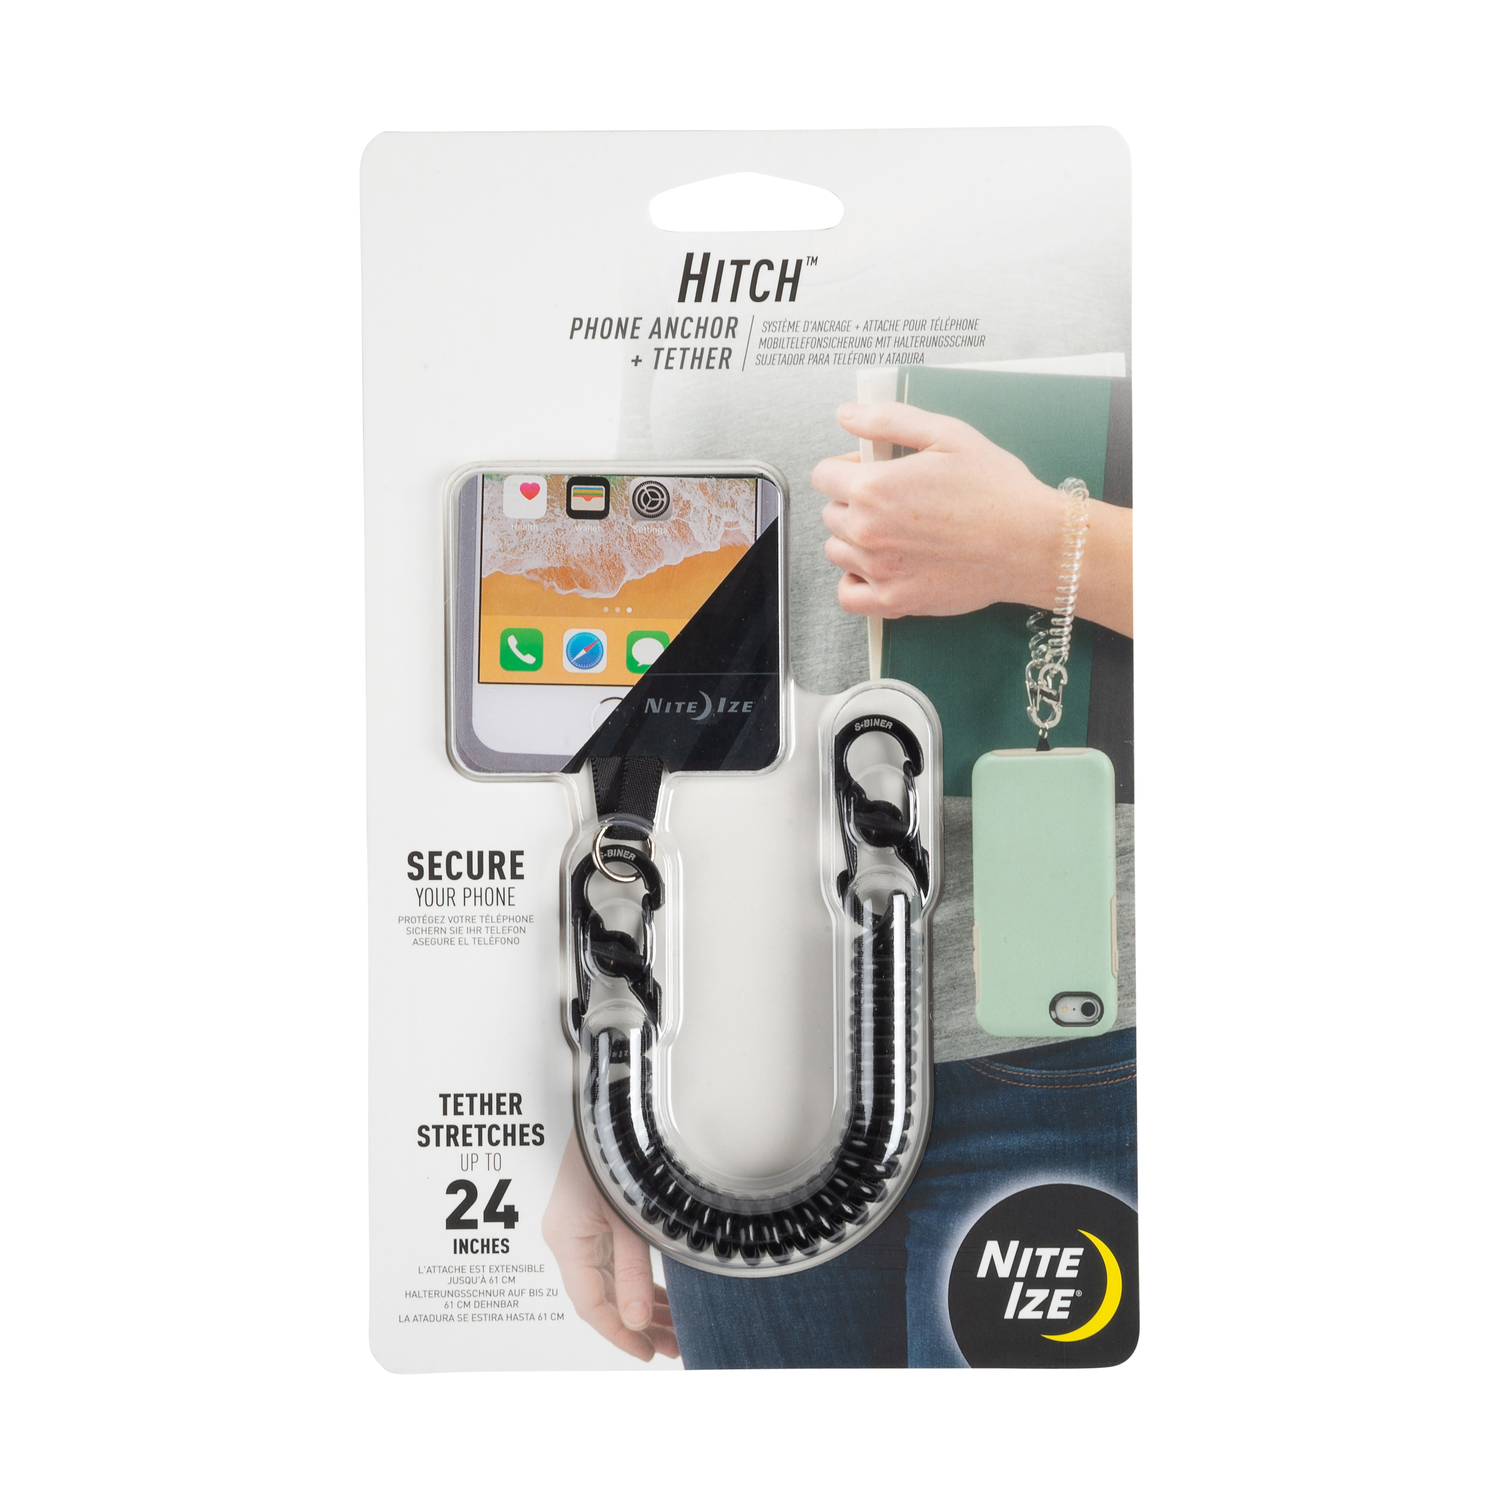 Photos - Mobile Phone Battery Nite Ize Hitch Black Phone Anchor and Tether For All Mobile Devices HPAT-0 